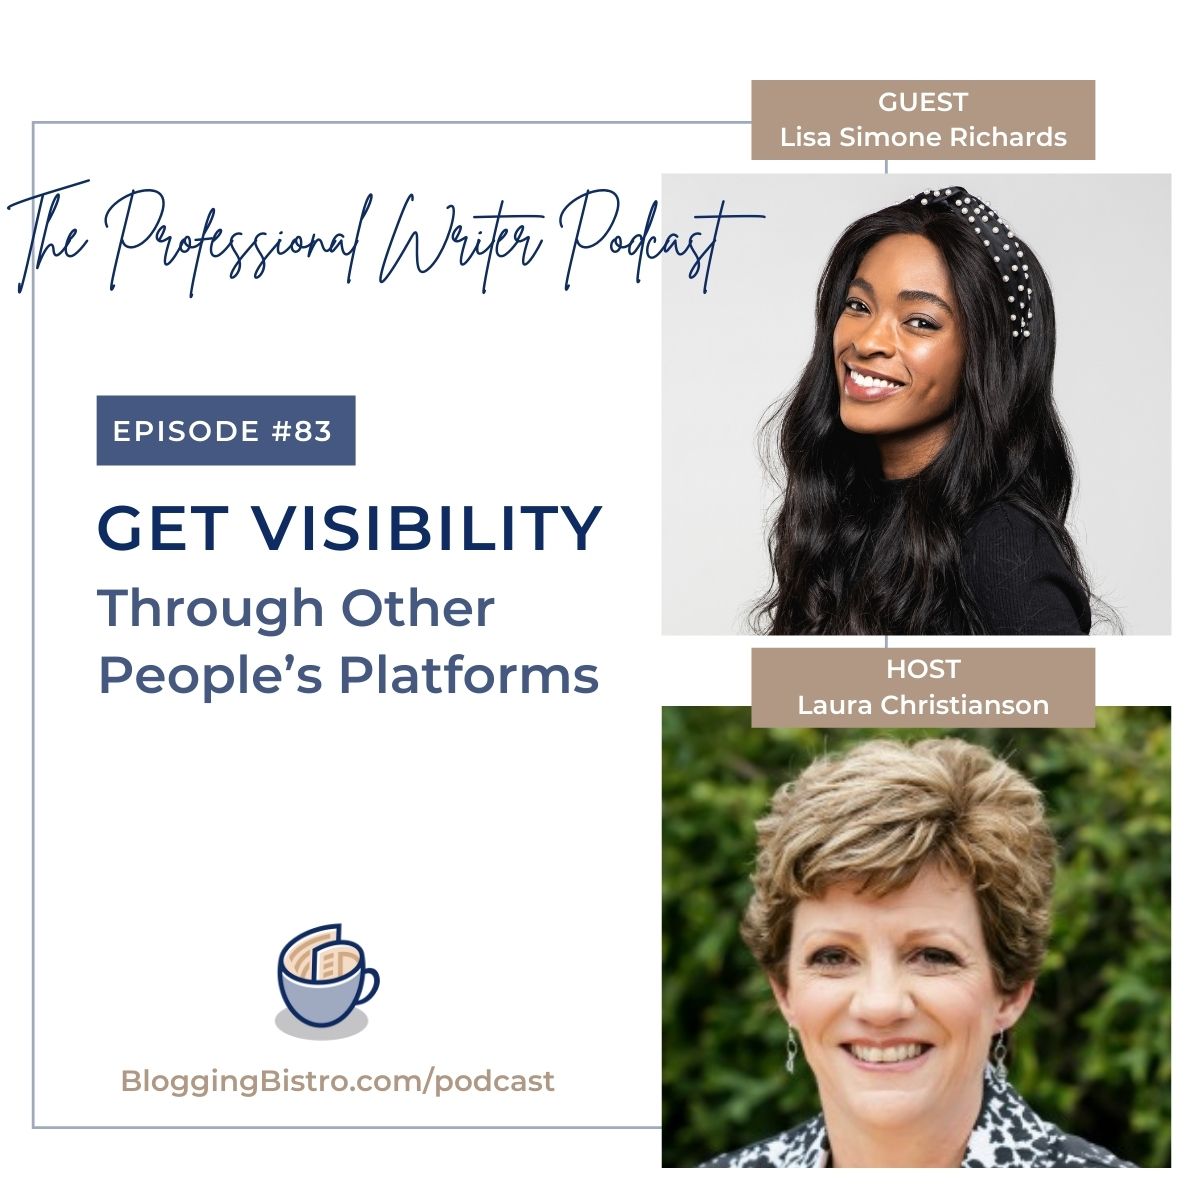 Get Visibility Through Other People’s Platforms, with Lisa Simone Richards